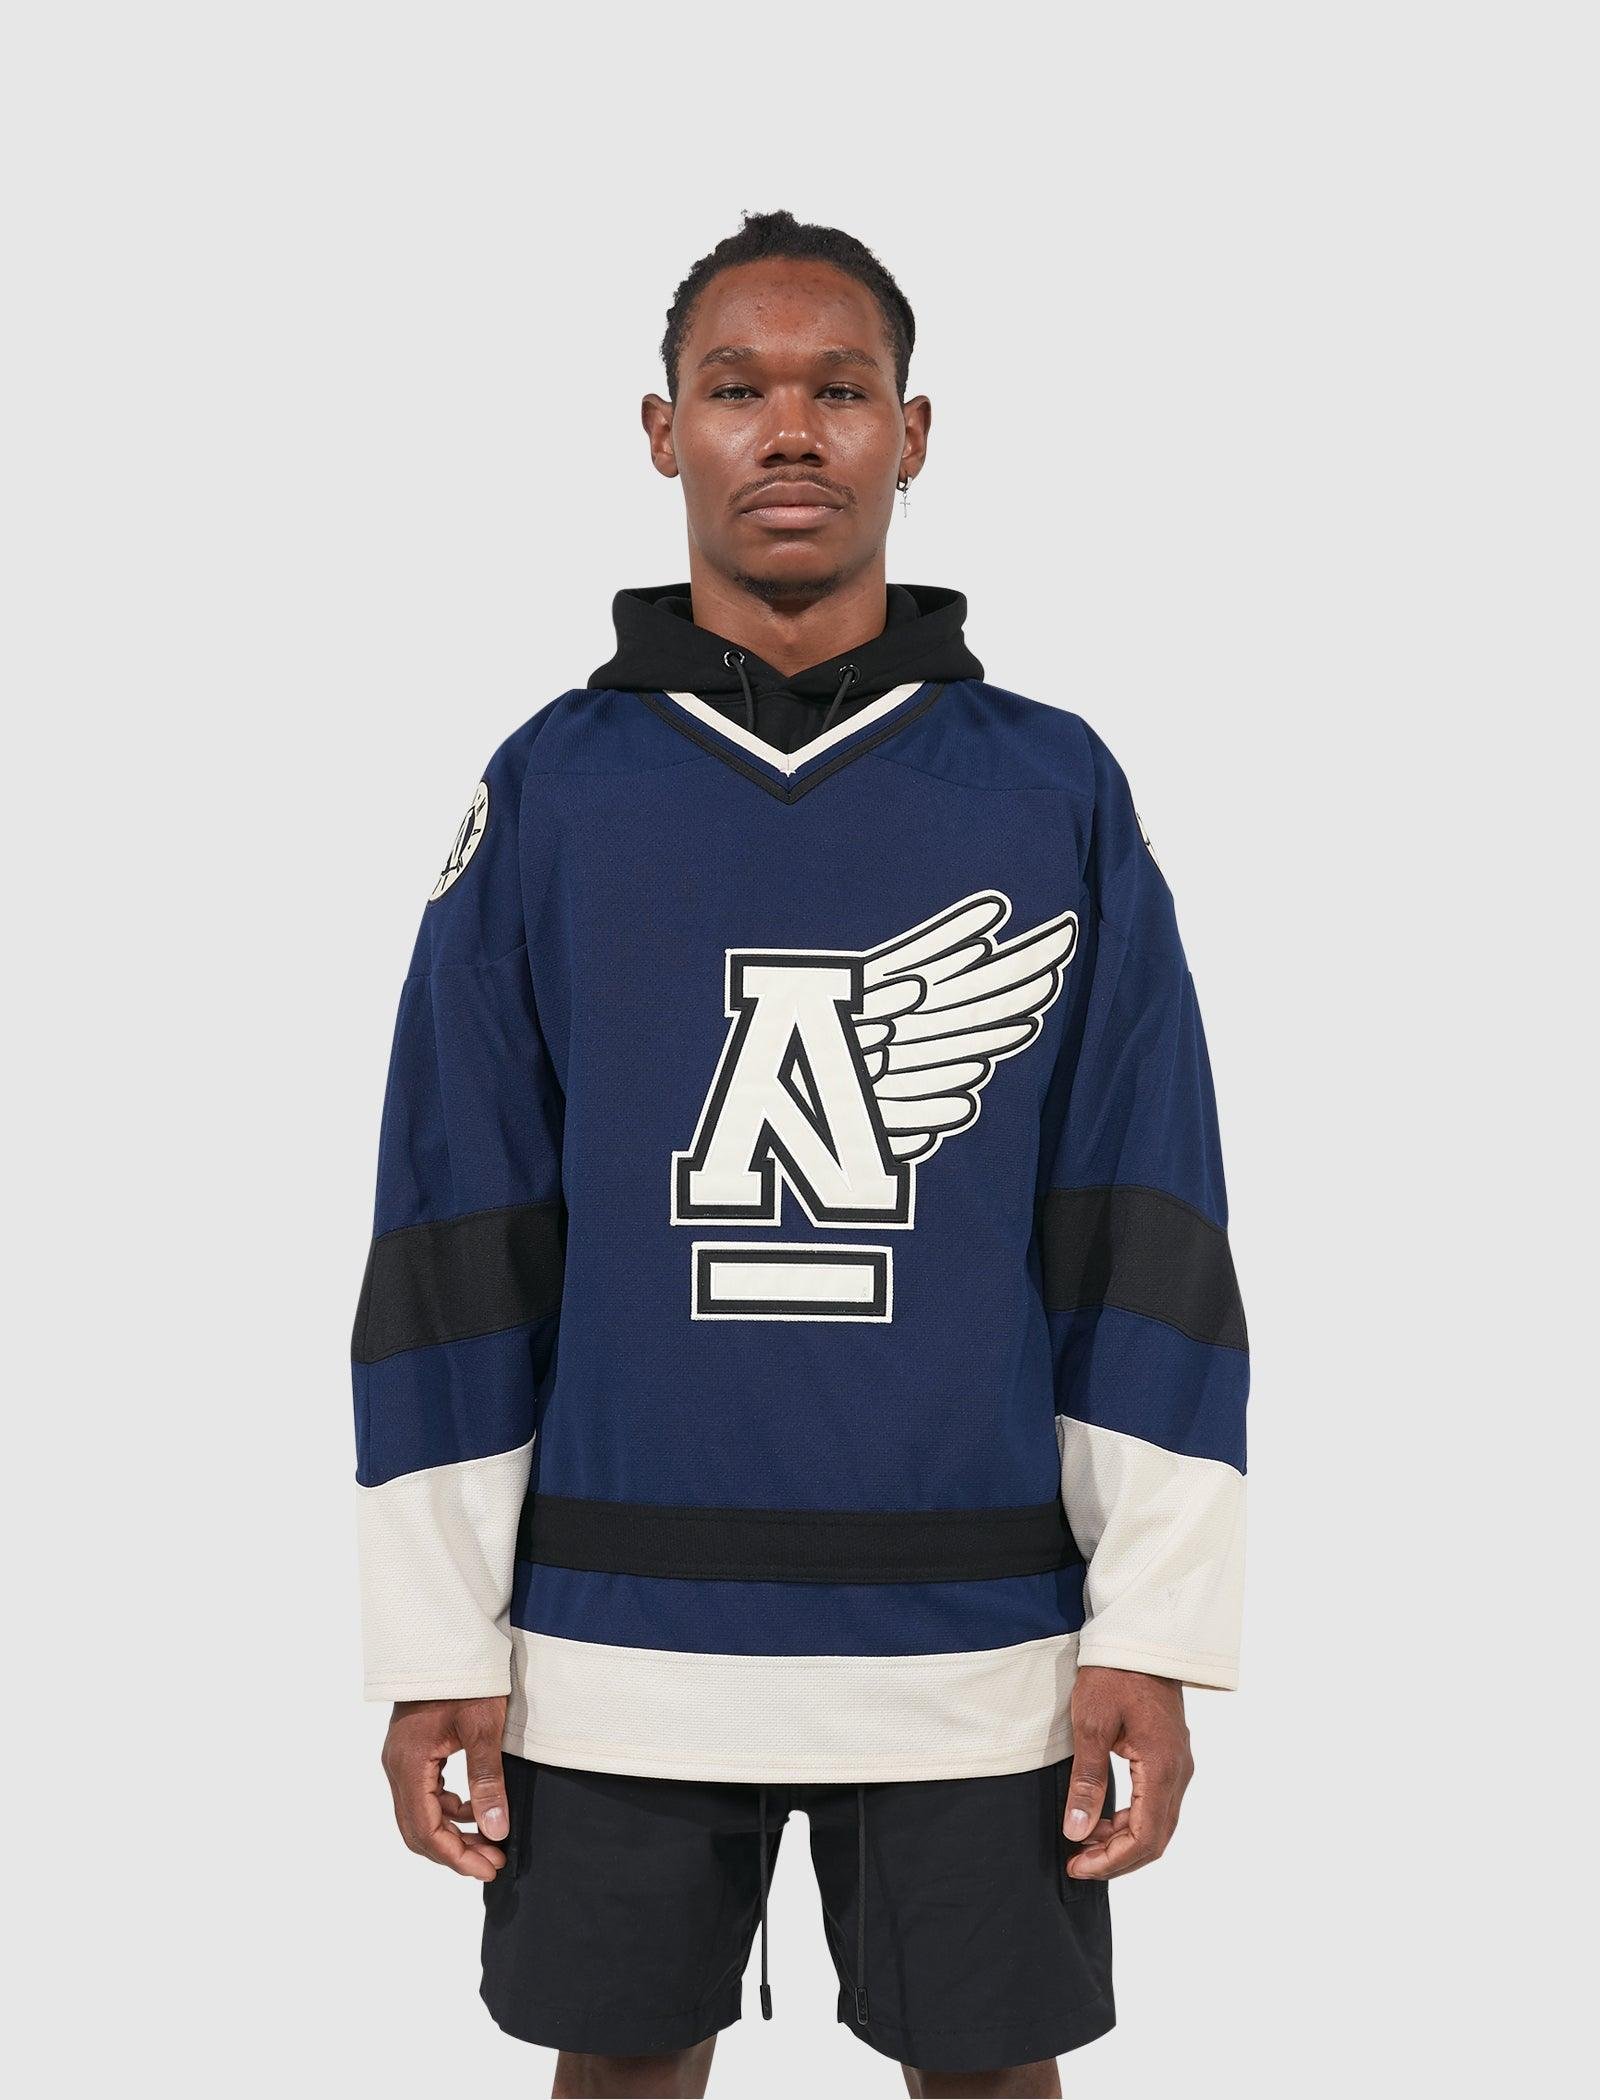 hockey jersey outfit men's